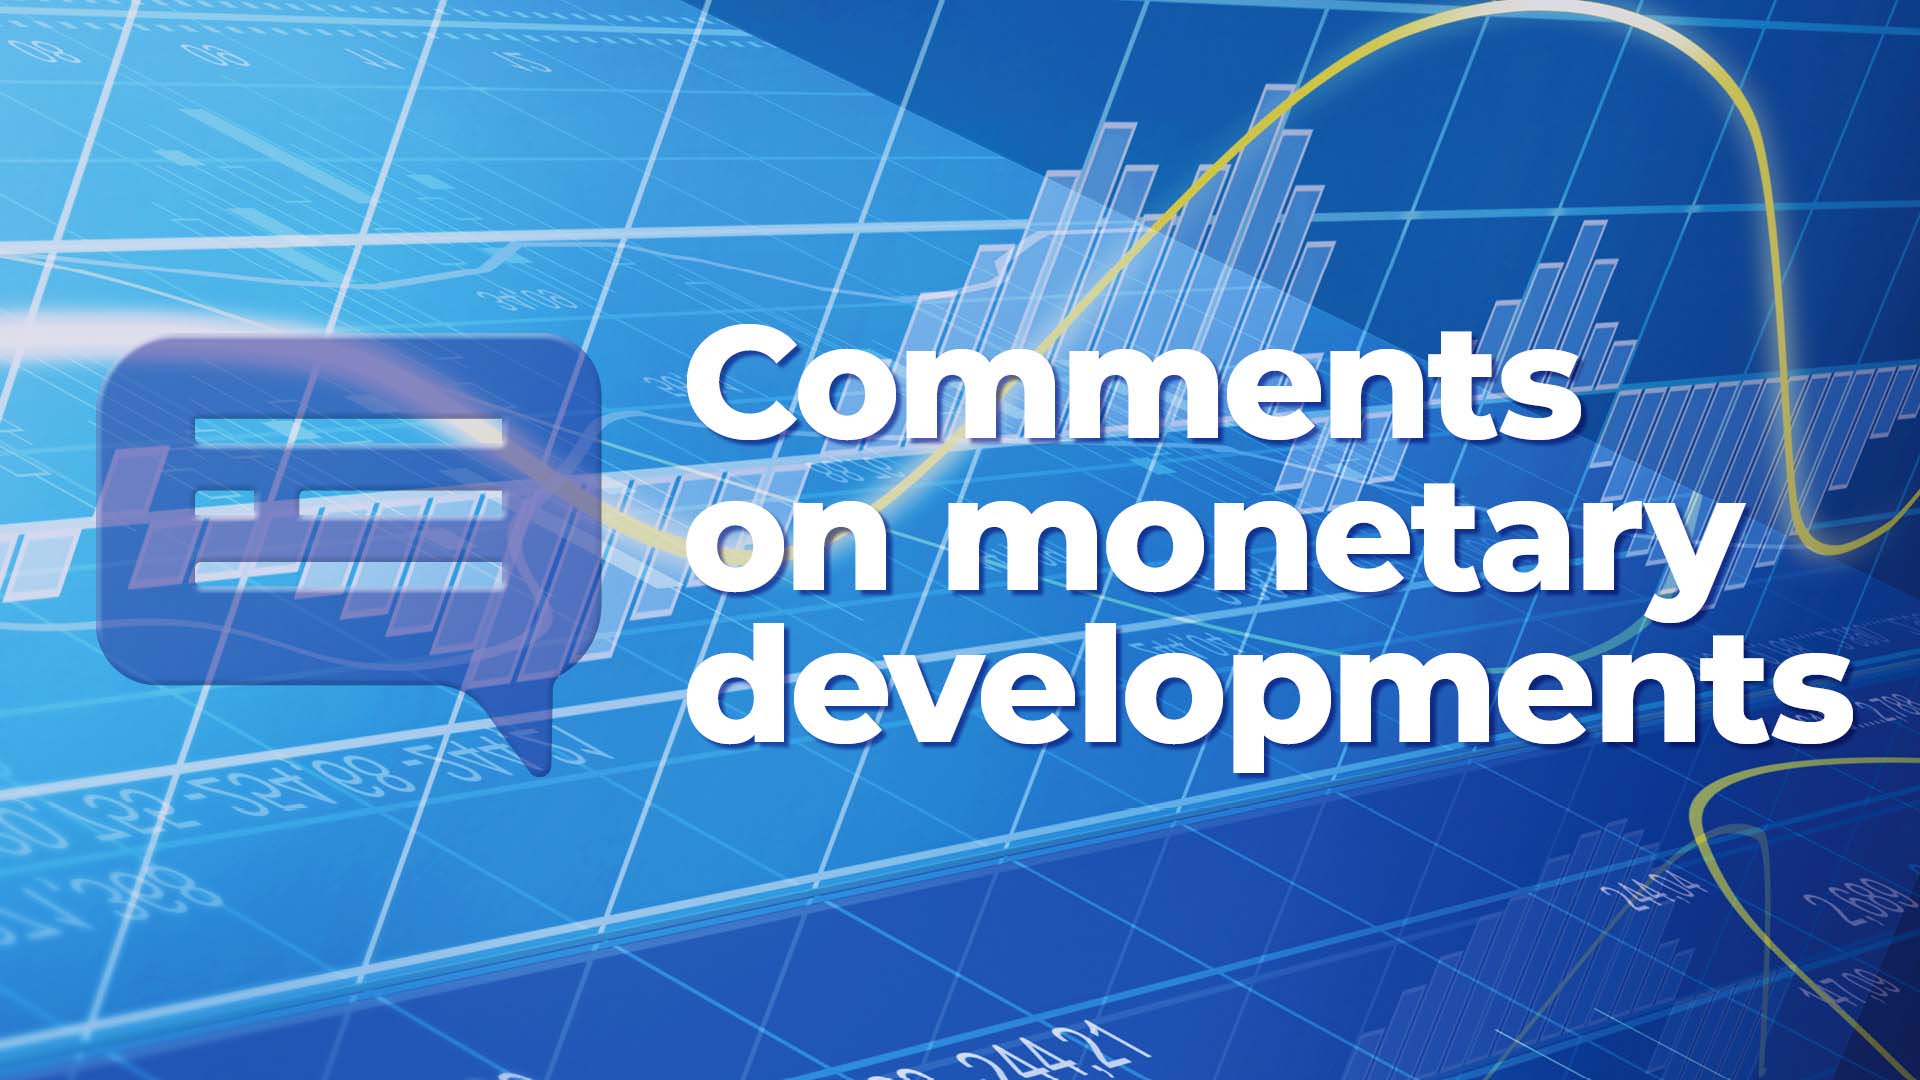 Comments on monetary developments for August 2022